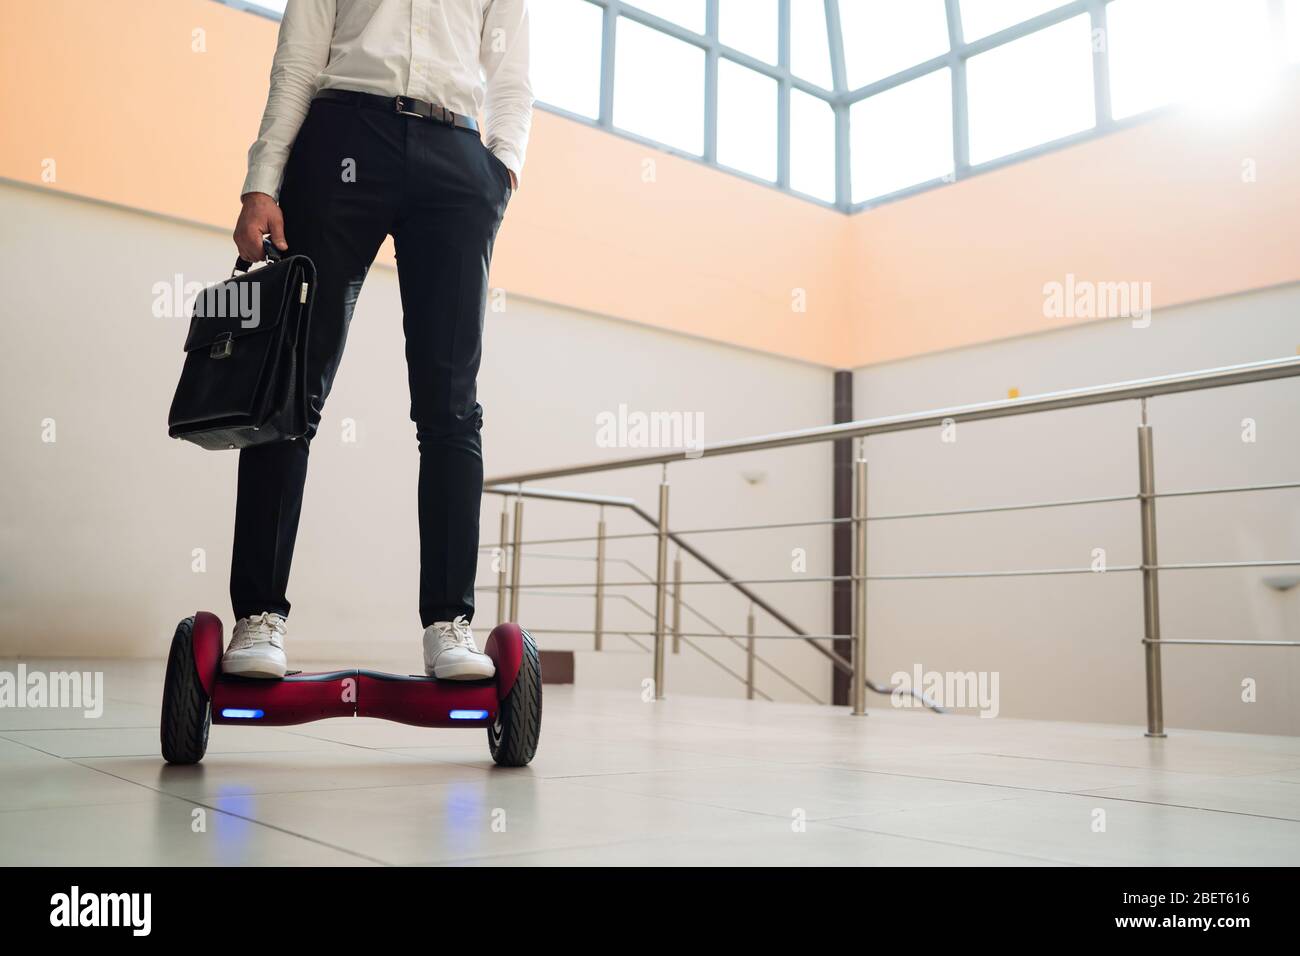 Young businessman is riding a gyroboard Stock Photo